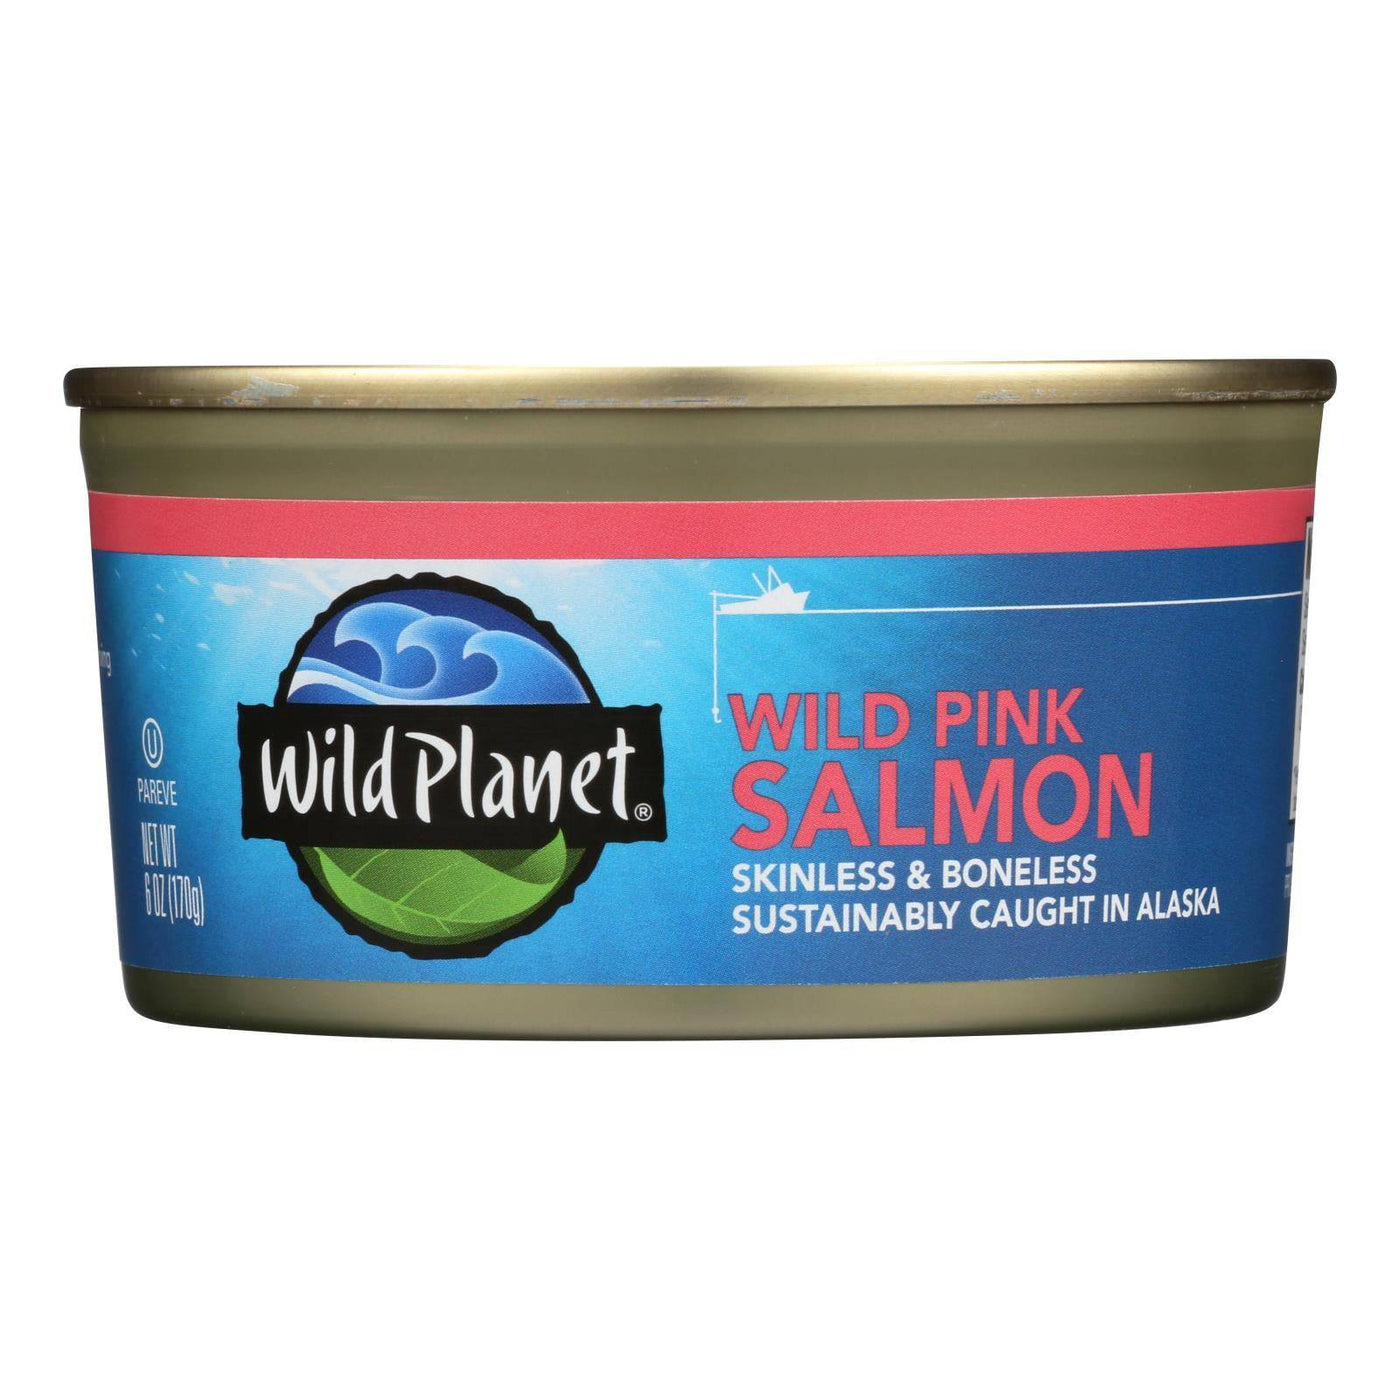 Buy Wild Planet Wild Alaskan Pink Salmon - Case Of 12 - 6 Oz.  at OnlyNaturals.us